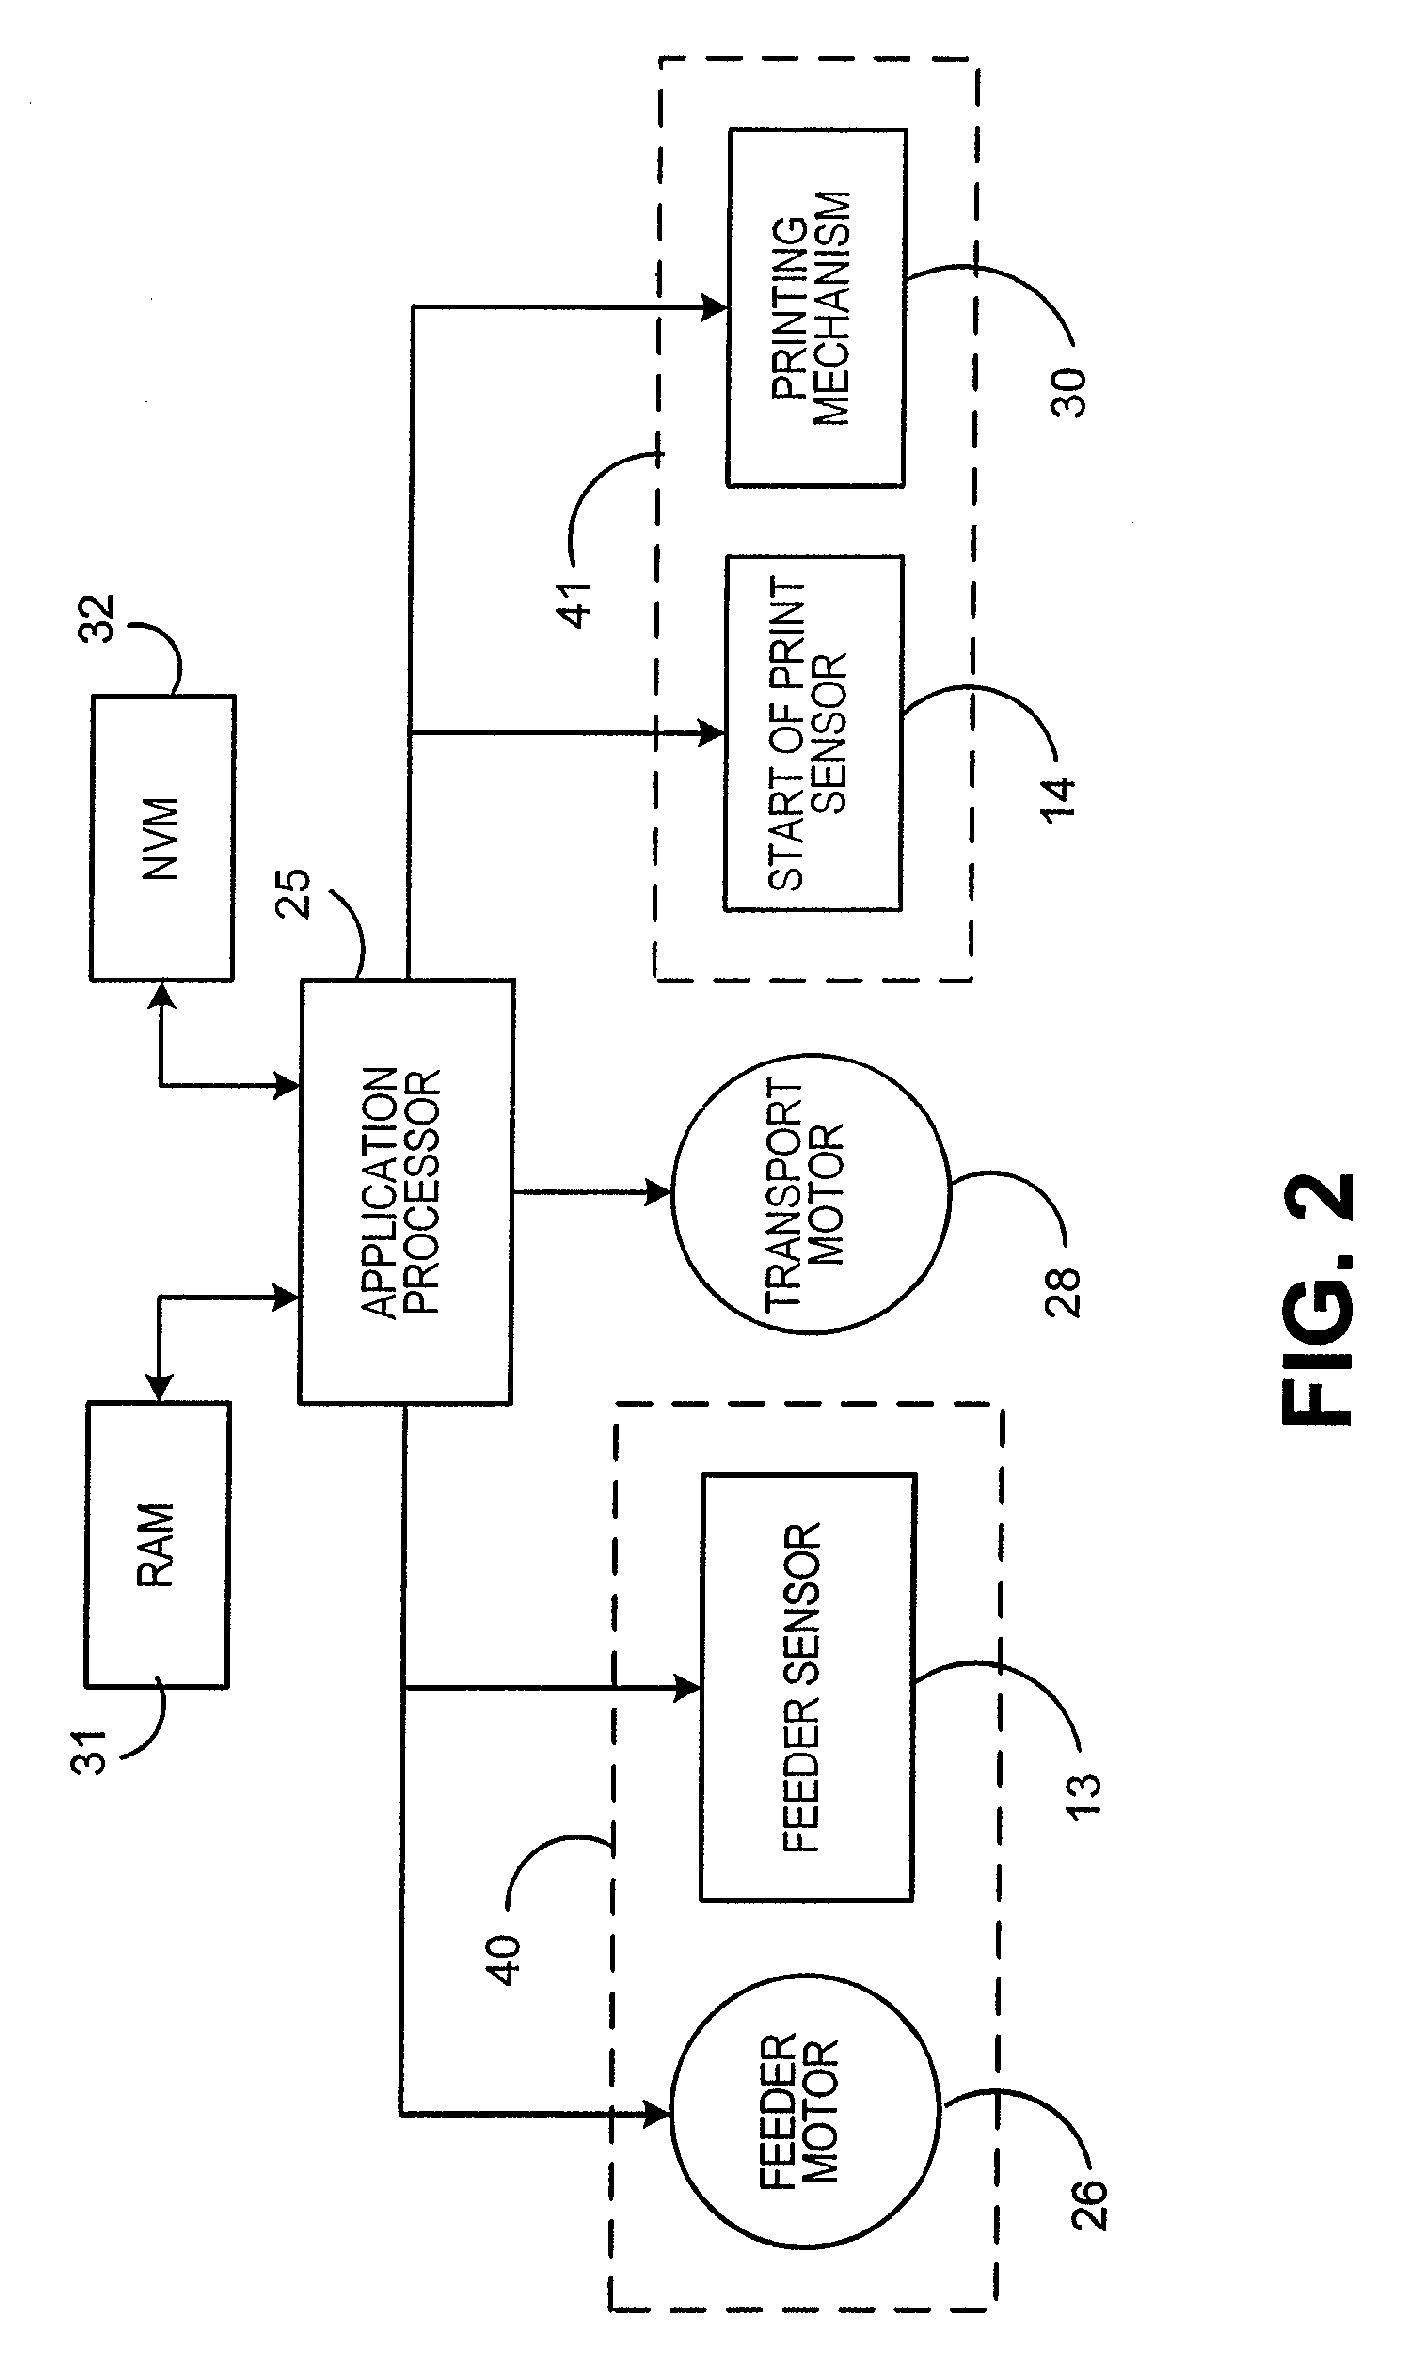 Method for detecting paper feed shingling errors and synchronizing a printer and a feeder